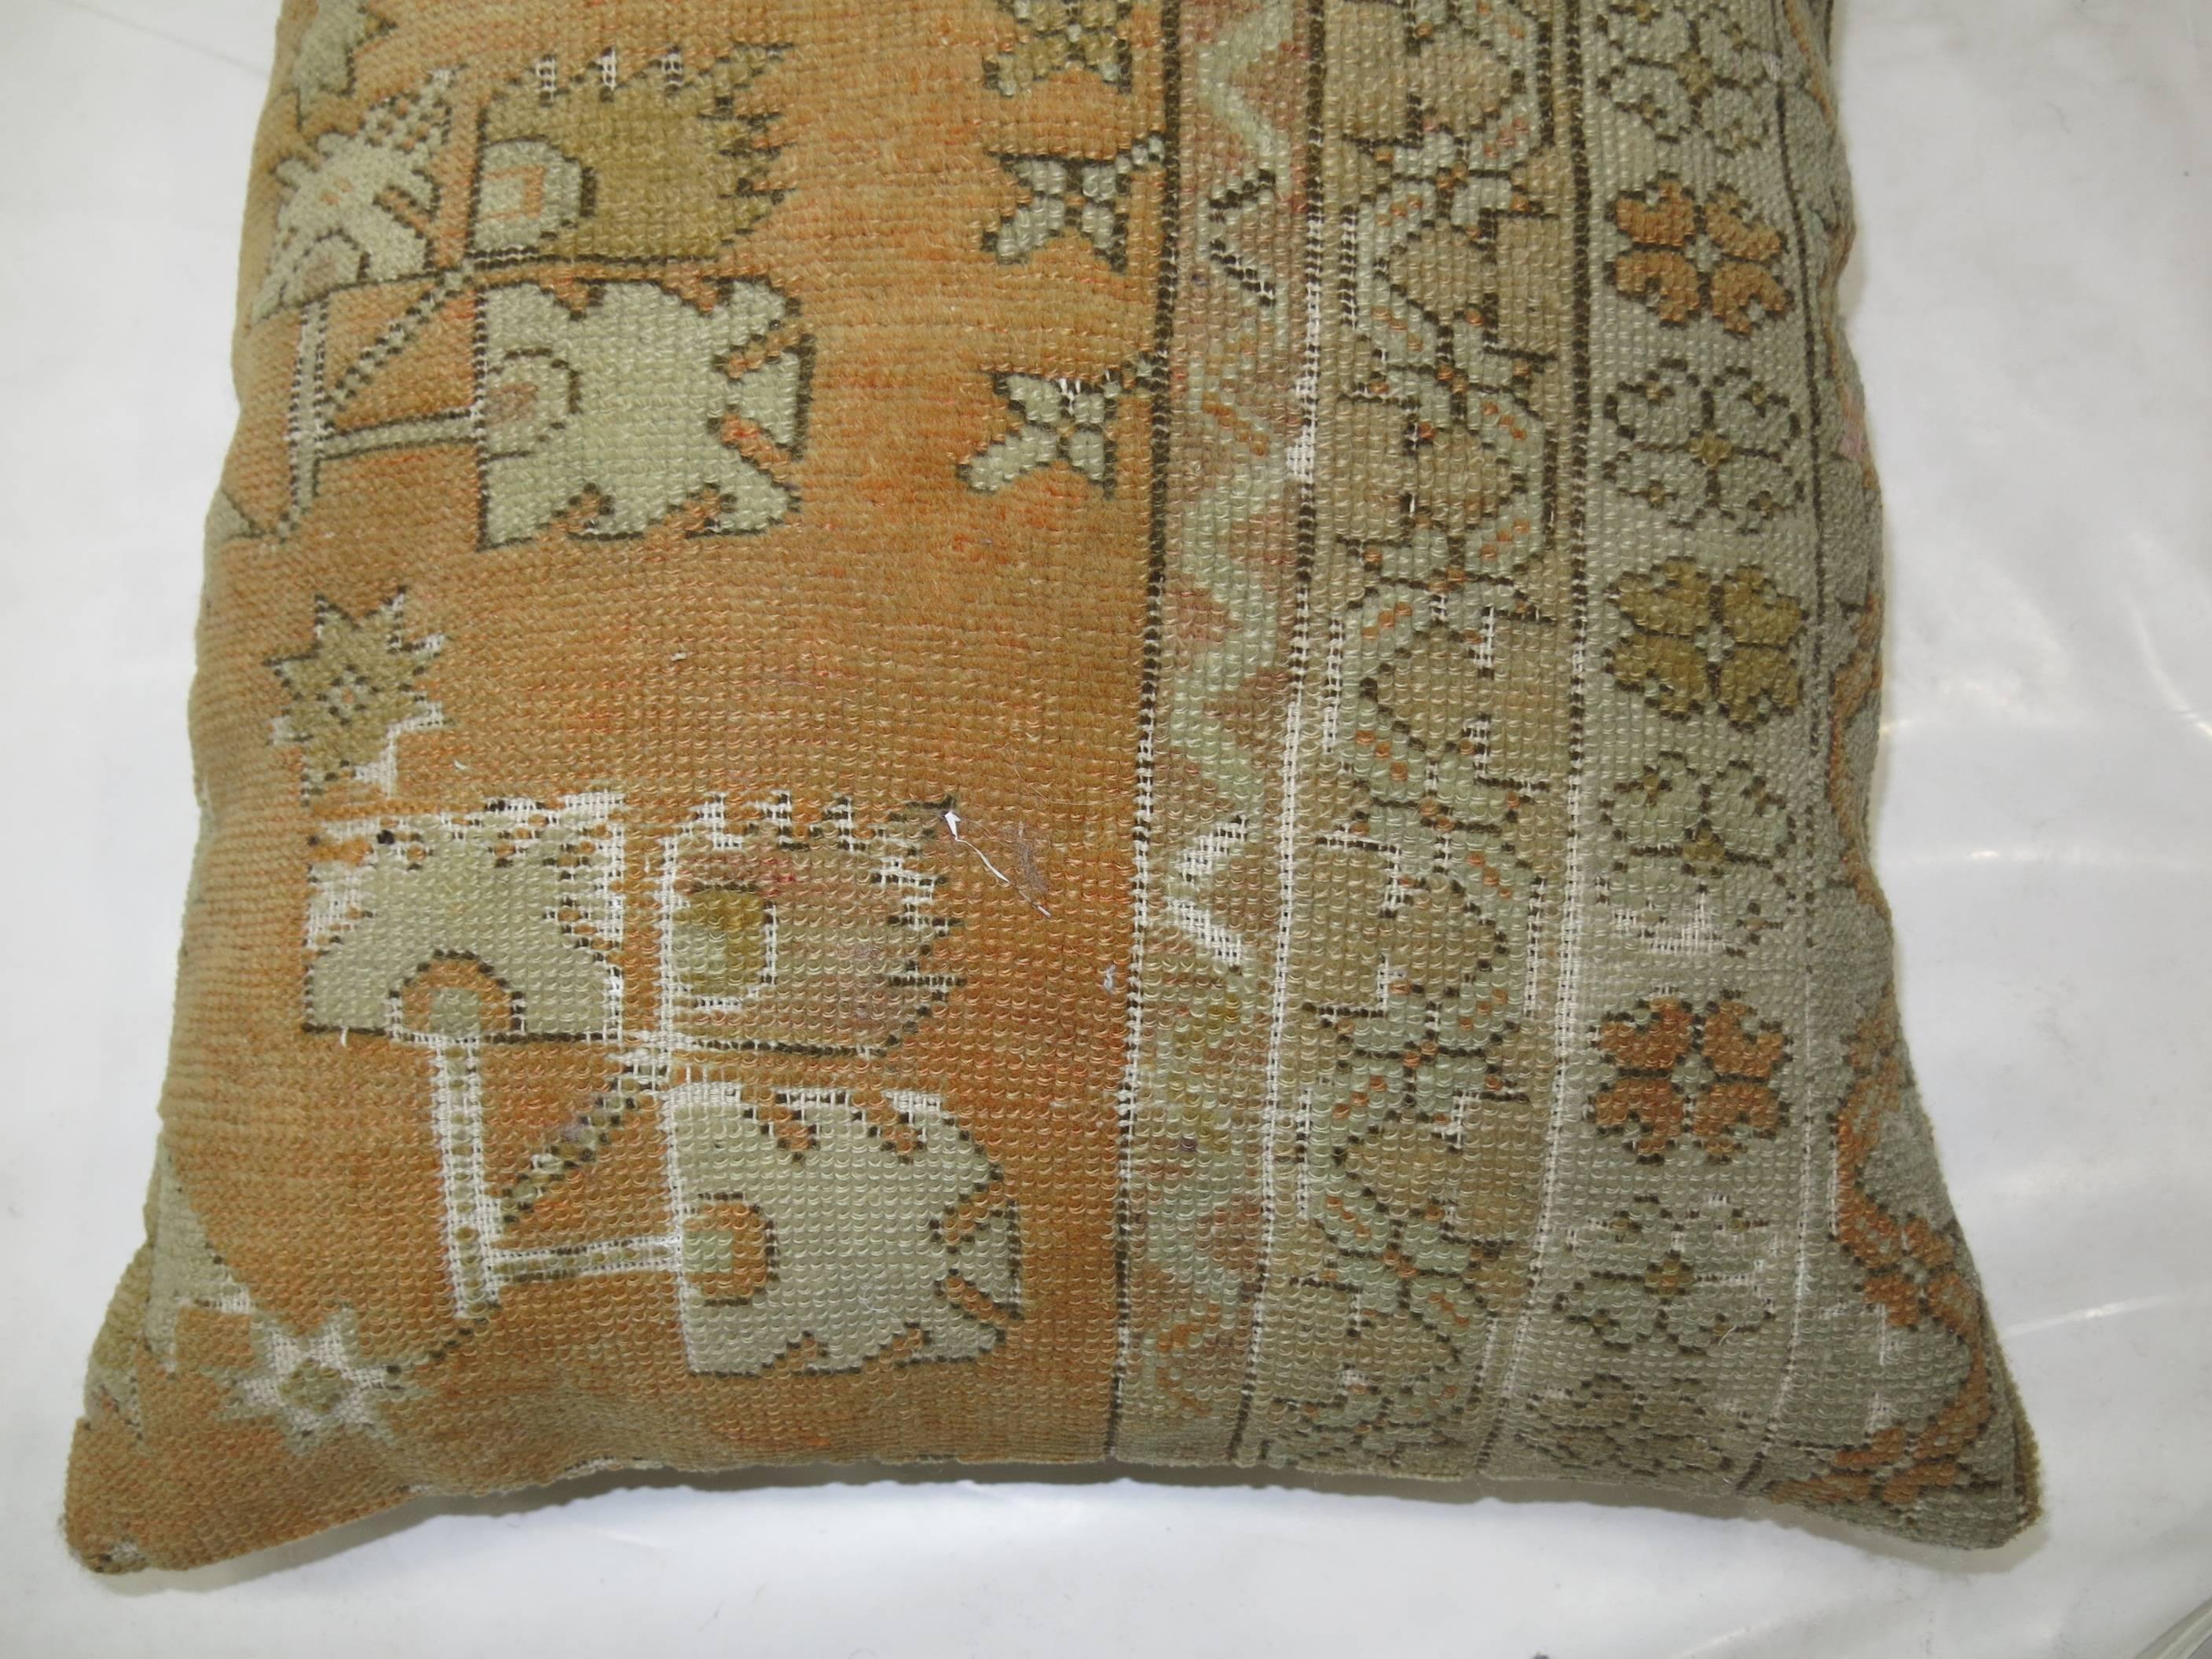 One of a kind pillow cushion from an early 20th century Turkish Rug. zipper closure and poly fill insert provided

Measures: 18